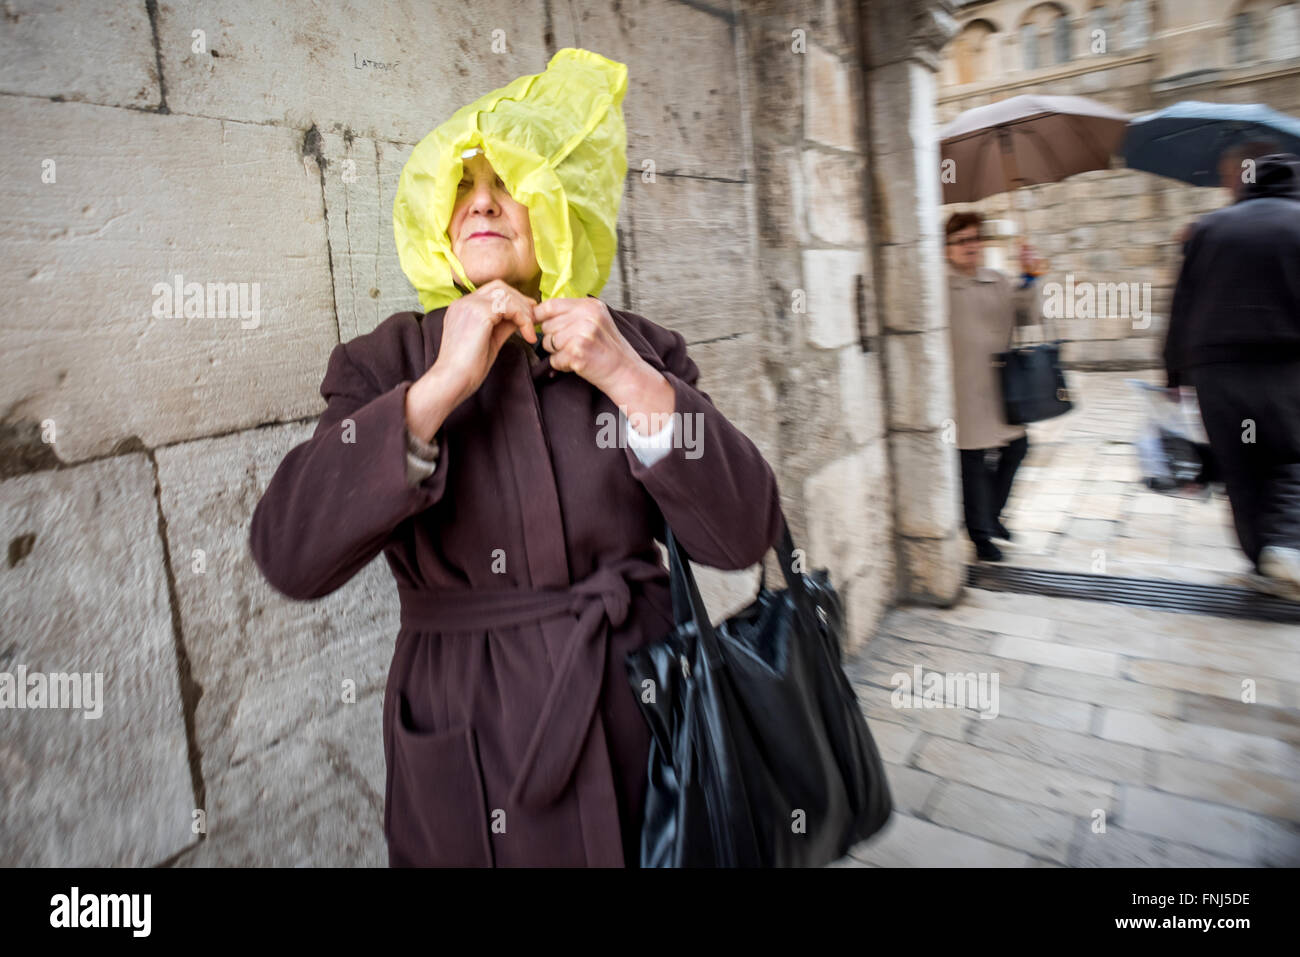 A visitor using a bag to take shelter from a downpour in the old city of Dubrovnik. Stock Photo